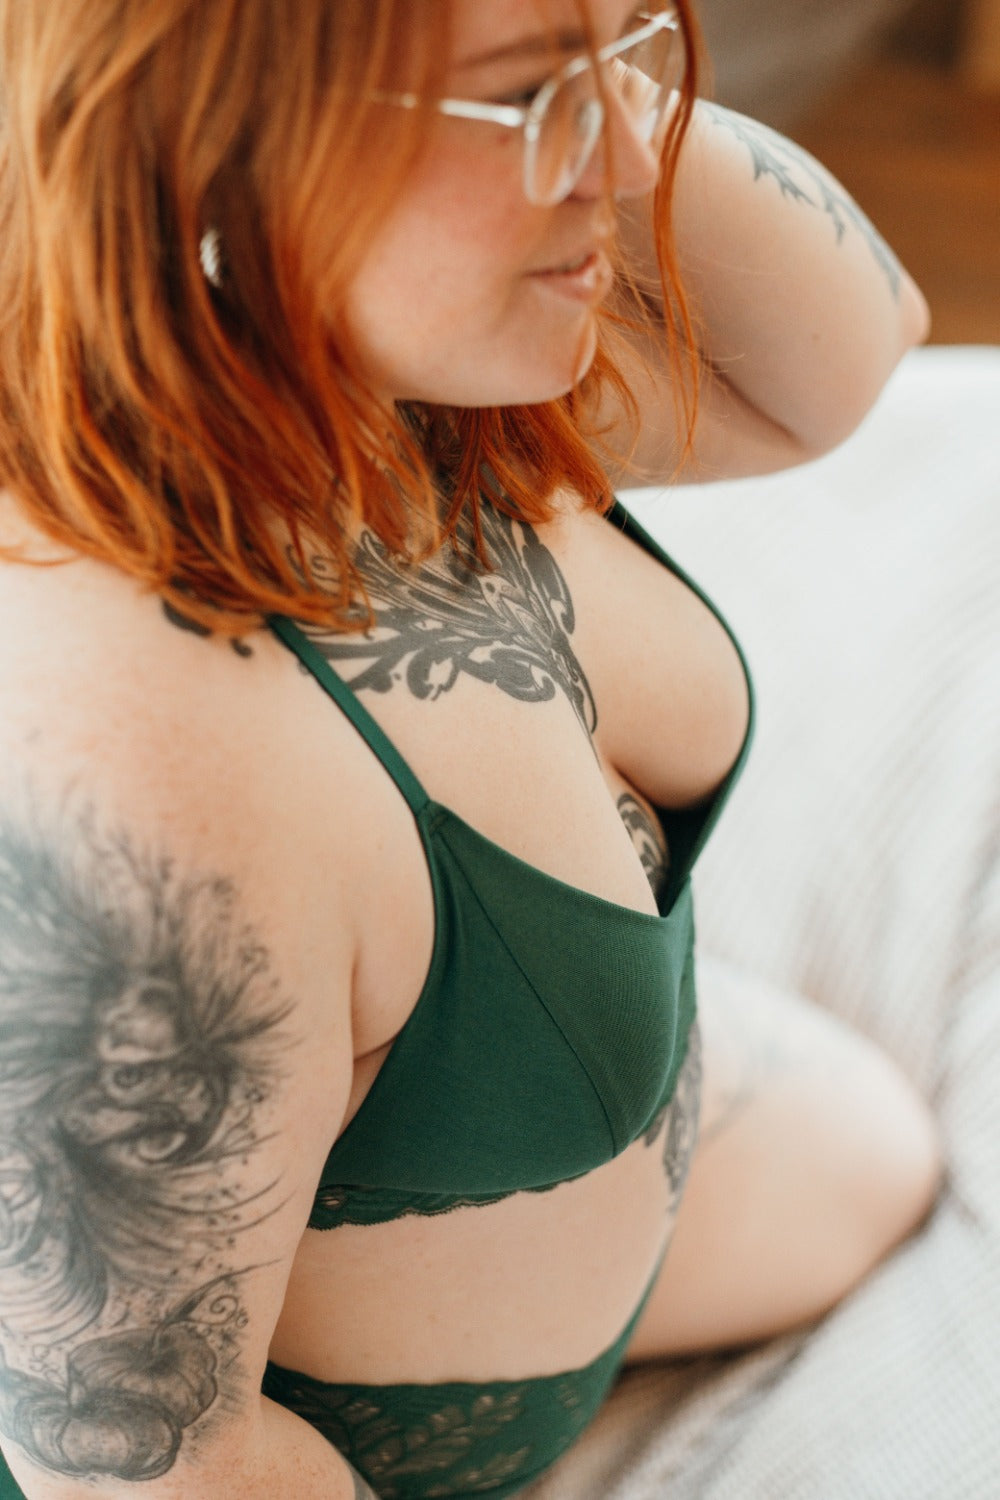 Woman kneels on bed and wears dark green lace and TENCEL underwear.